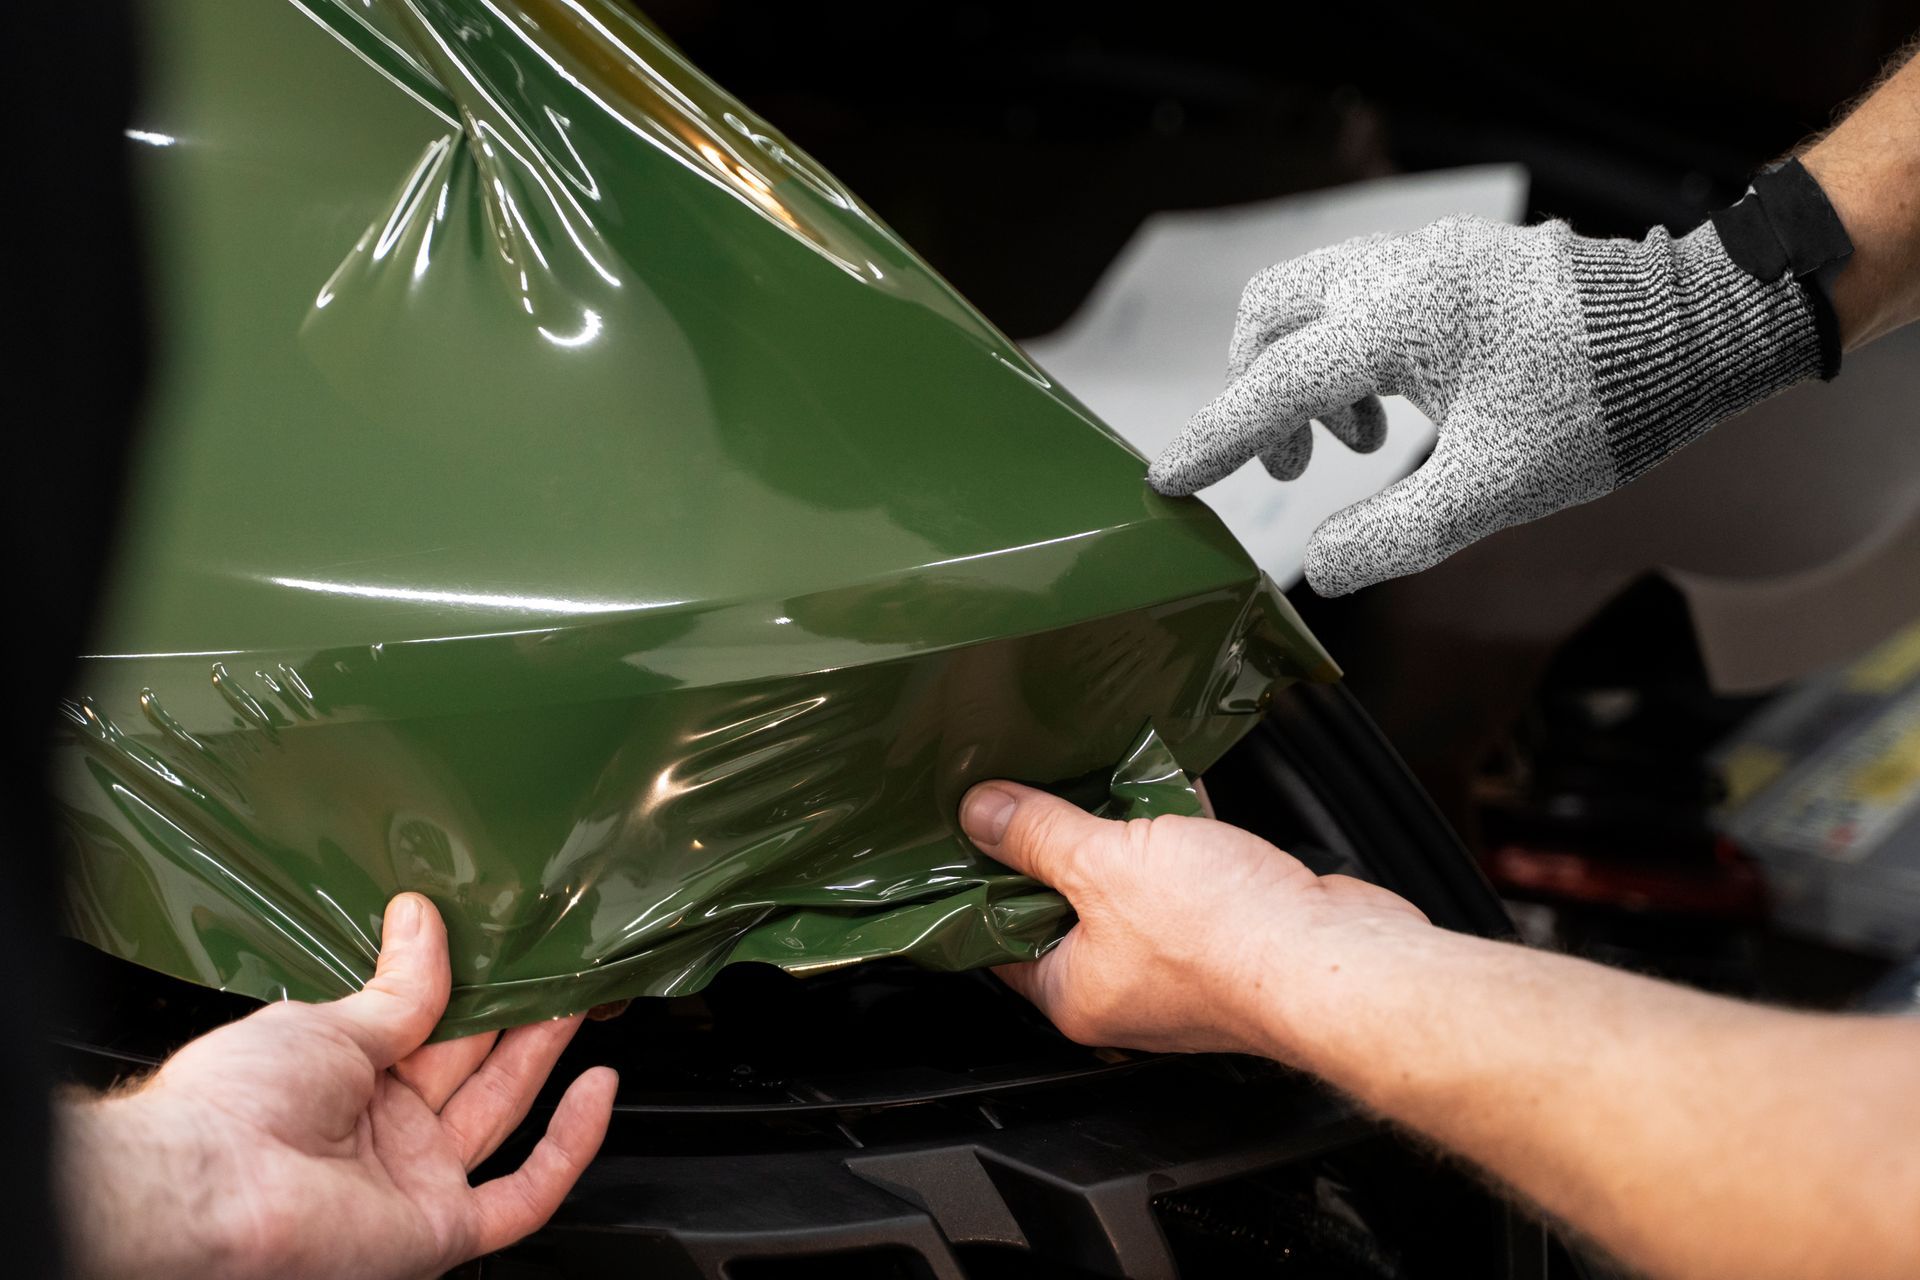 a person is wrapping a car in green plastic .